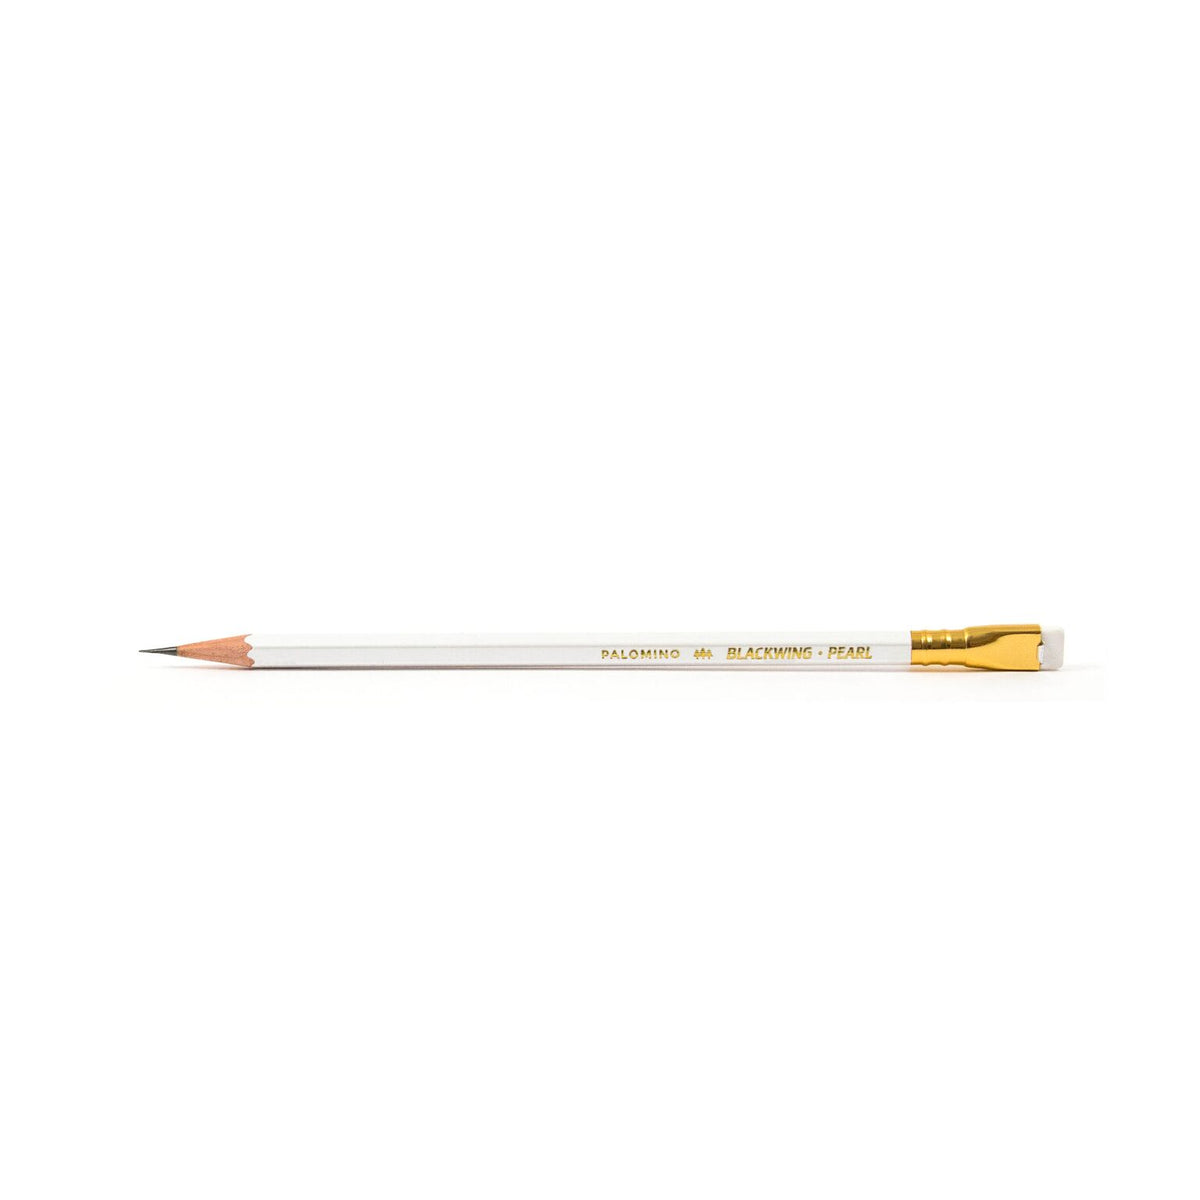 Full Image of a Blackwing Pearl Pencil